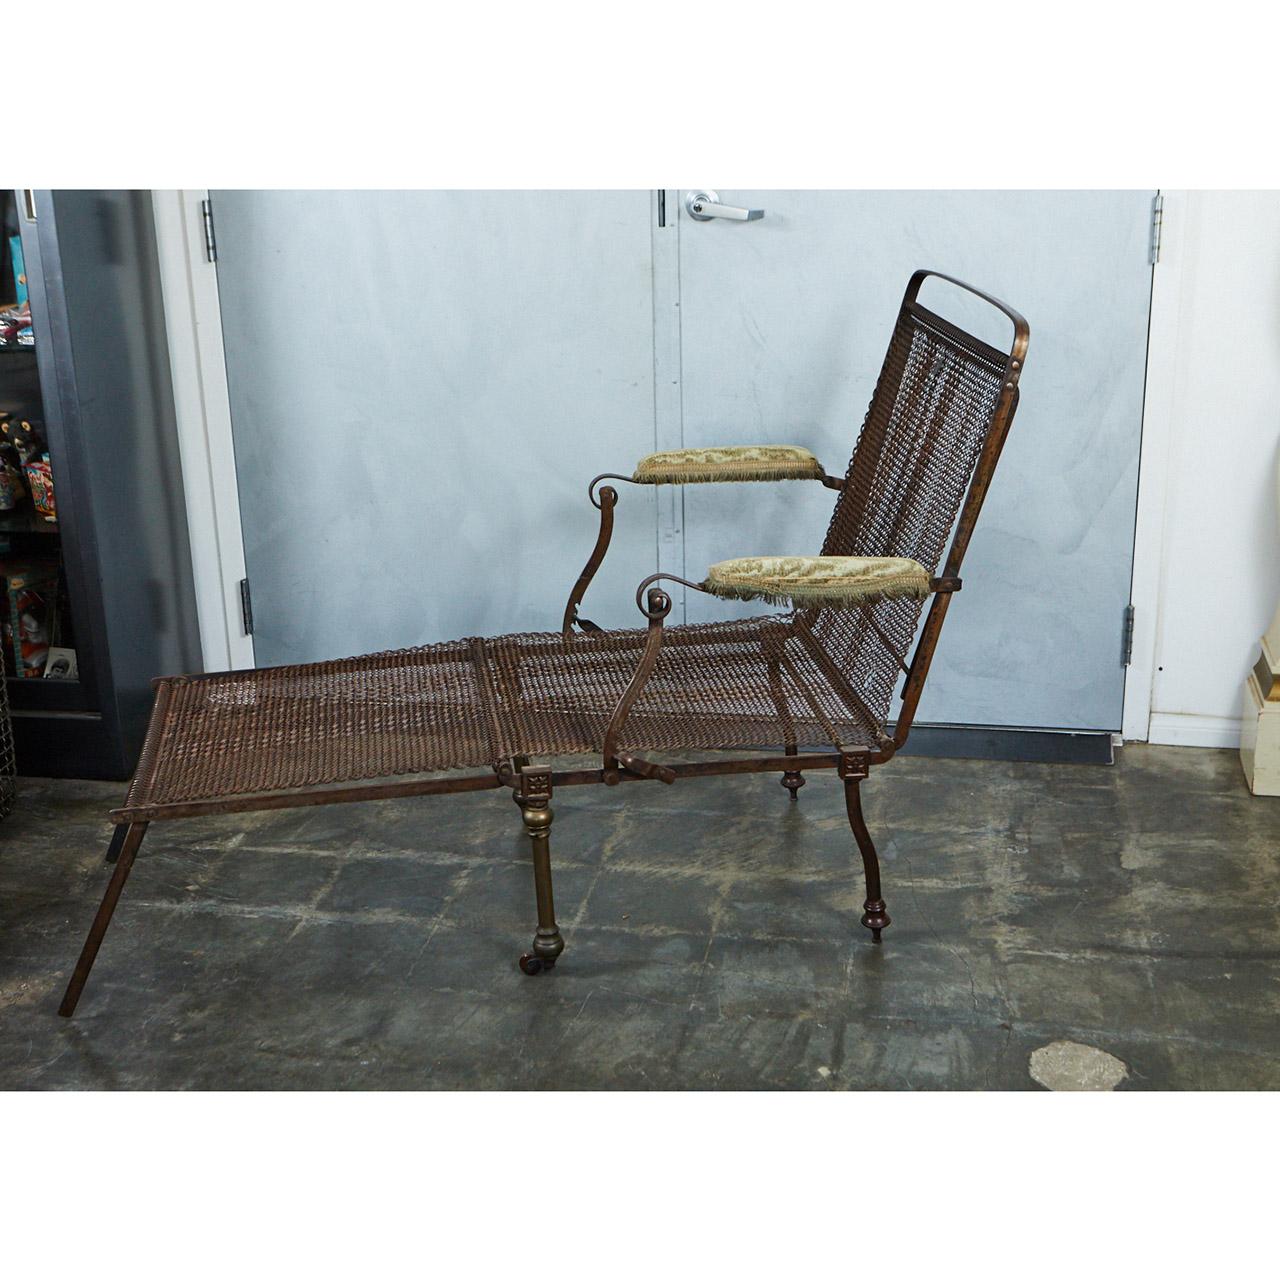 This unique piece of campaign furniture has an iron frame and woven metal body. It can be adjusted several ways to be used as a chair with or without a foot rest and also a bed with supports that fold out from the frame. The piece has upholstered